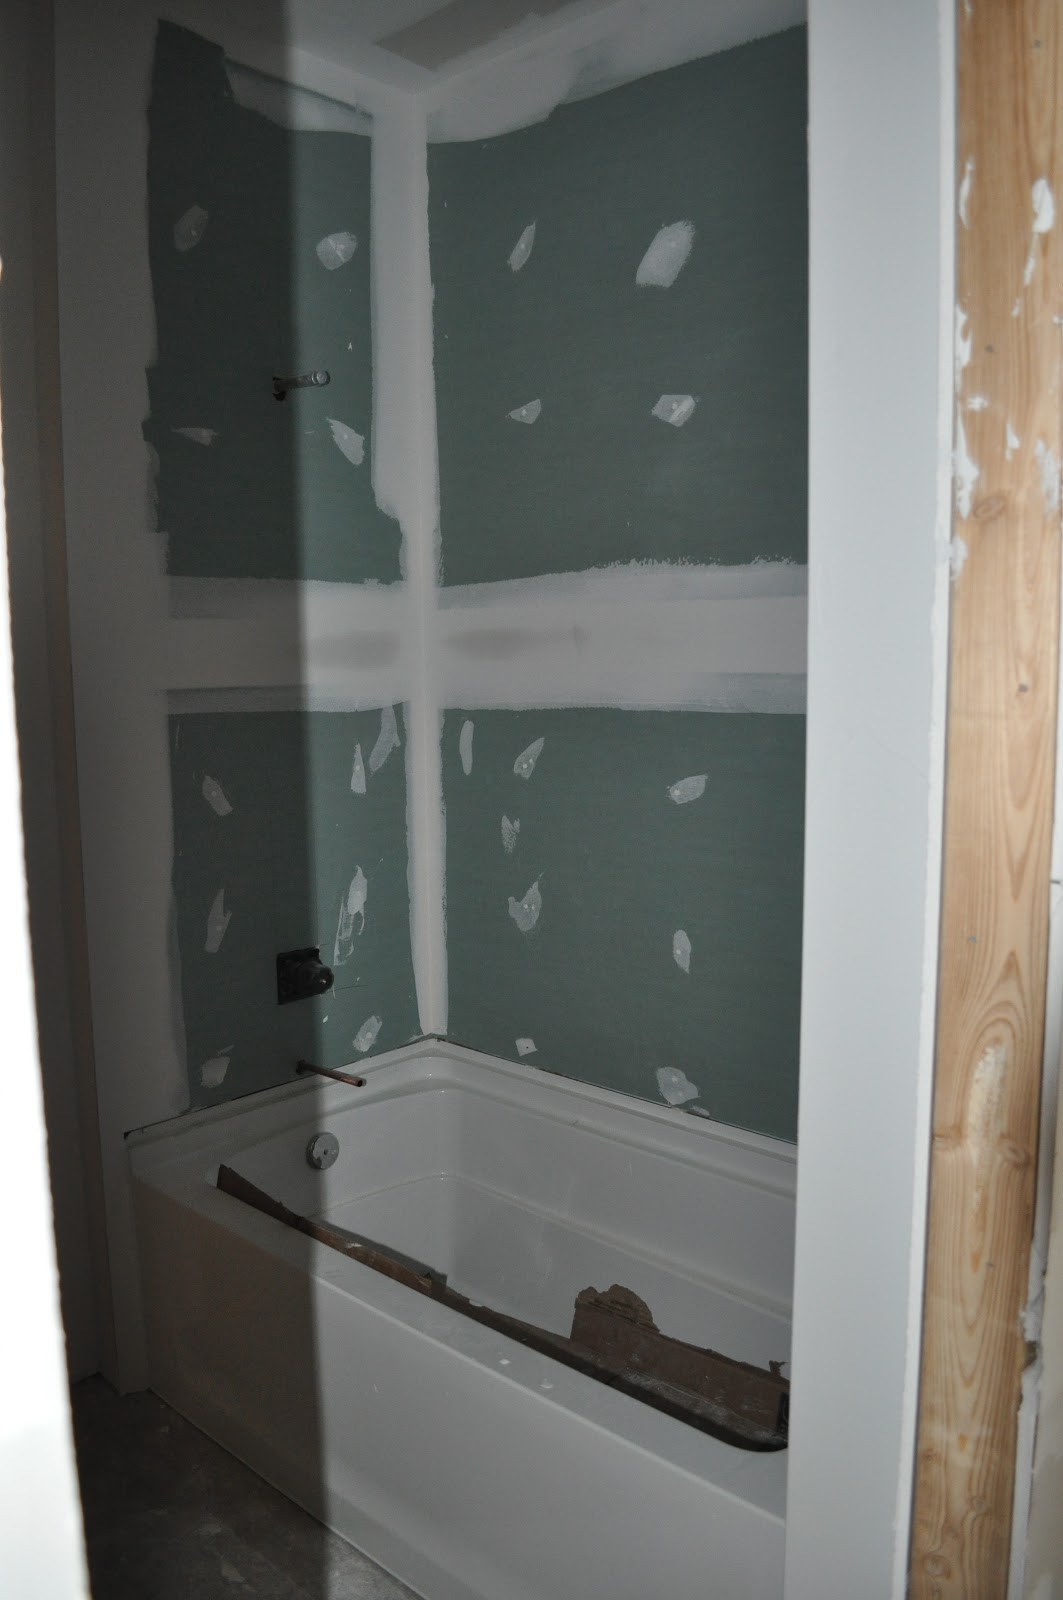 Tile Over Drywall Bathroom
 Basement Reno Lessons Learned from Drywalling My